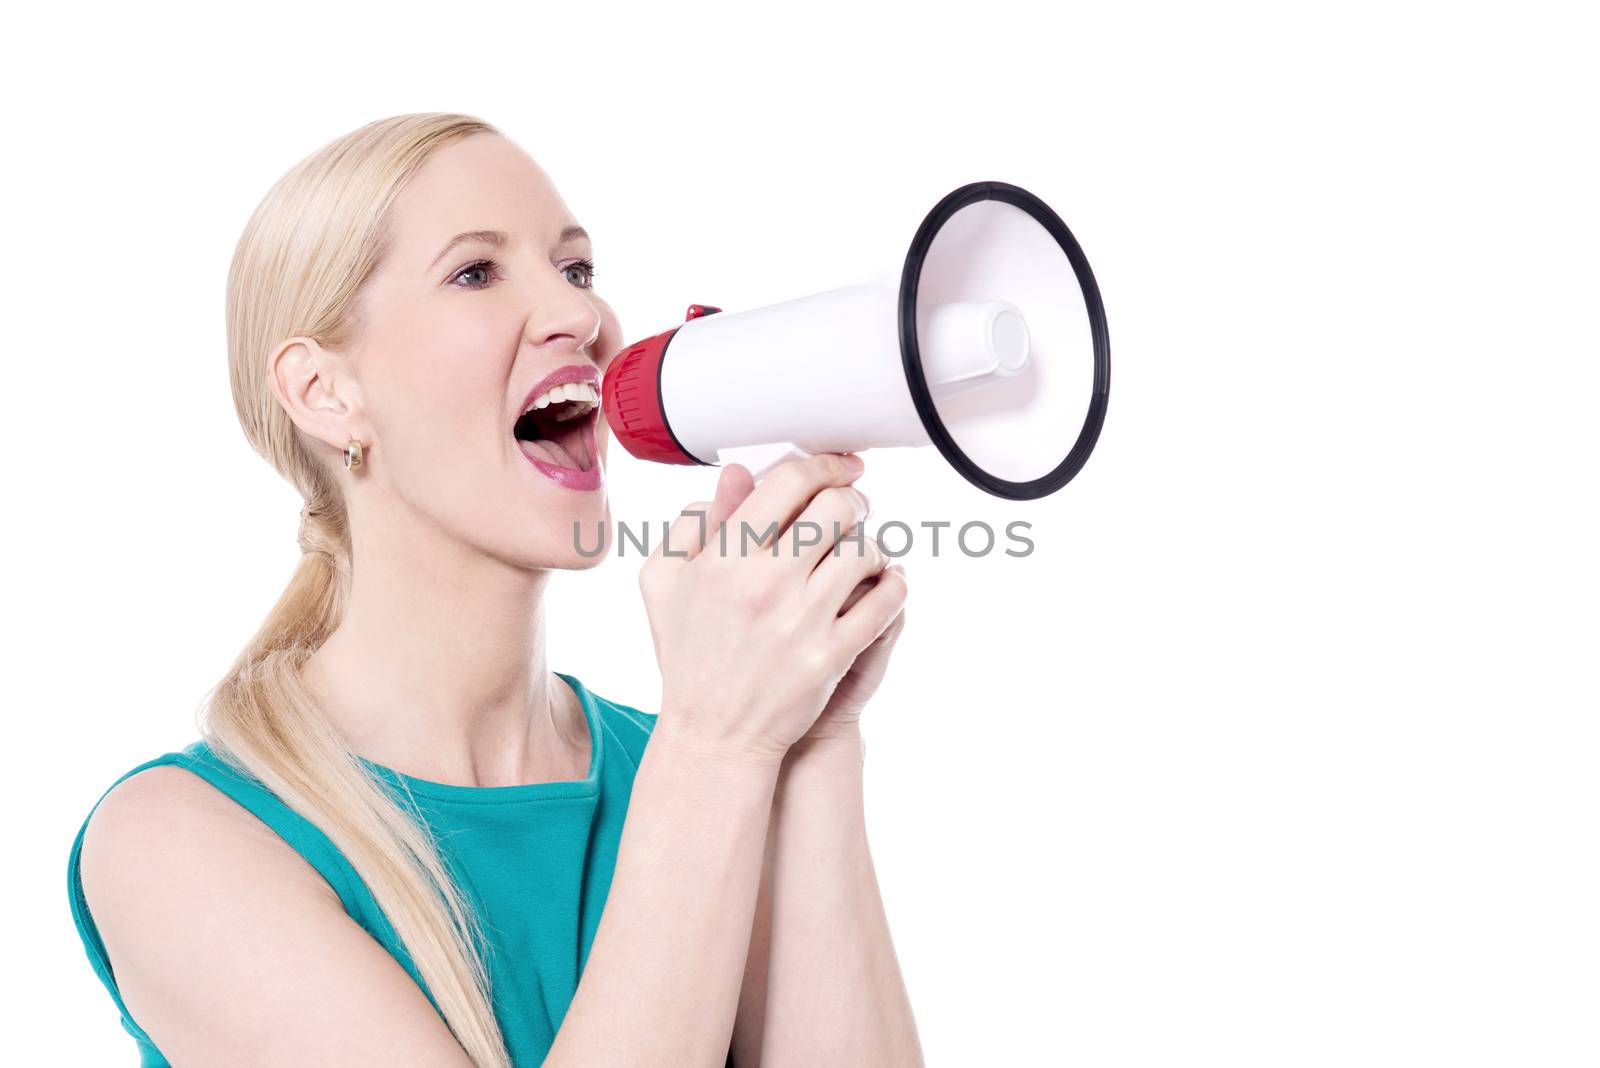 Portrait of a middle aged woman shouting through megaphone.